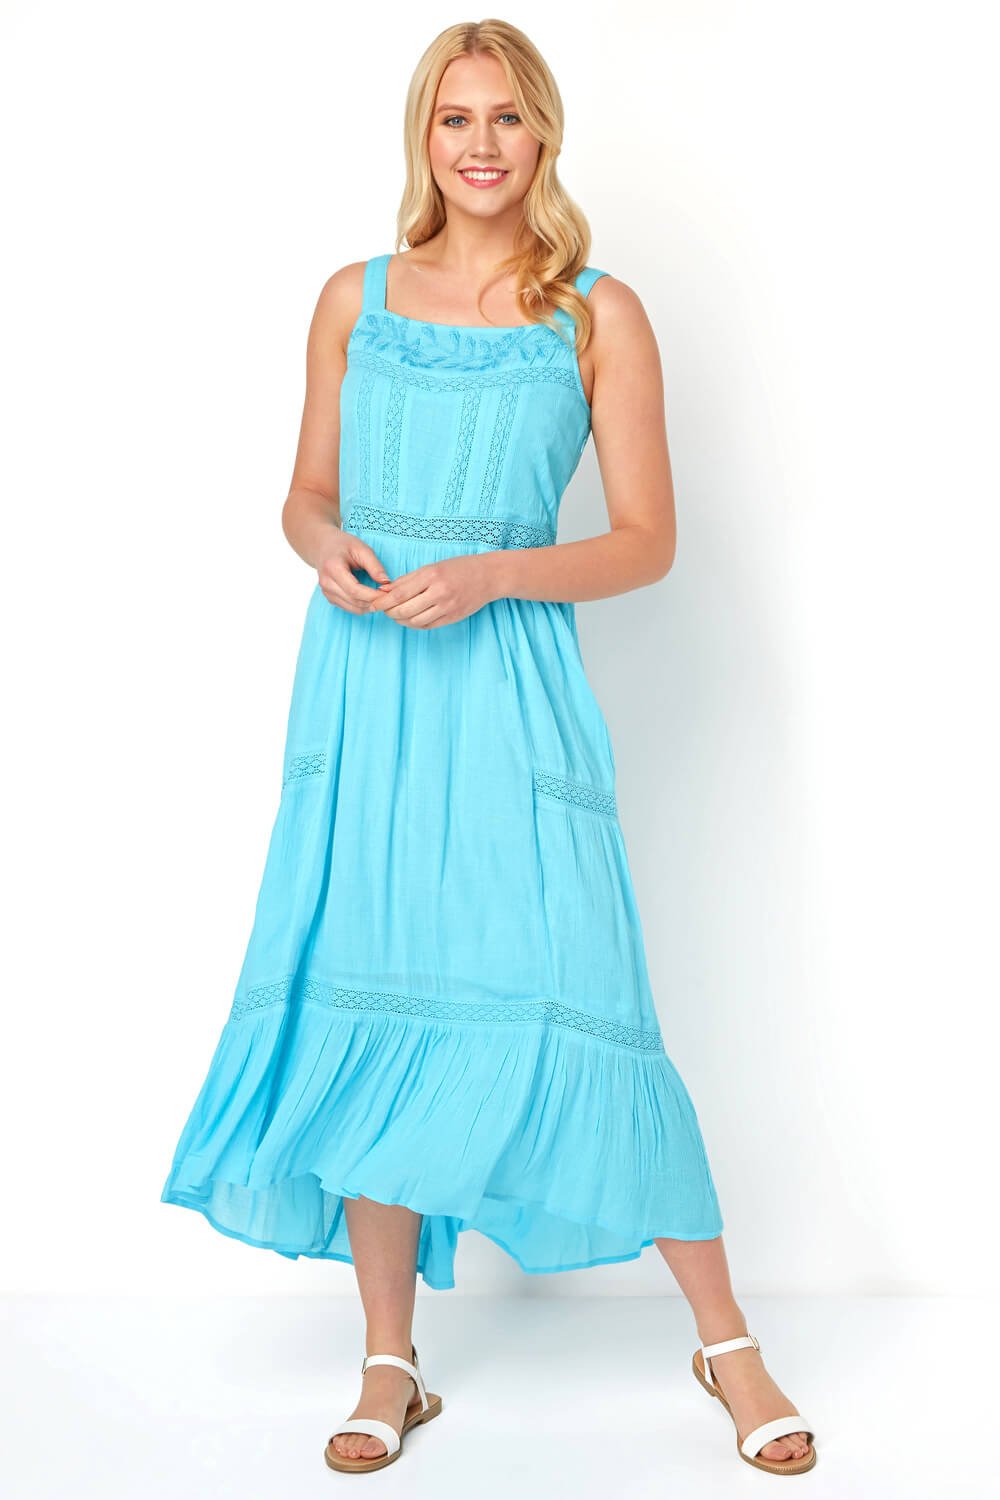 Ladder Lace Tiered Maxi Dress in Turquoise - Roman Originals UK